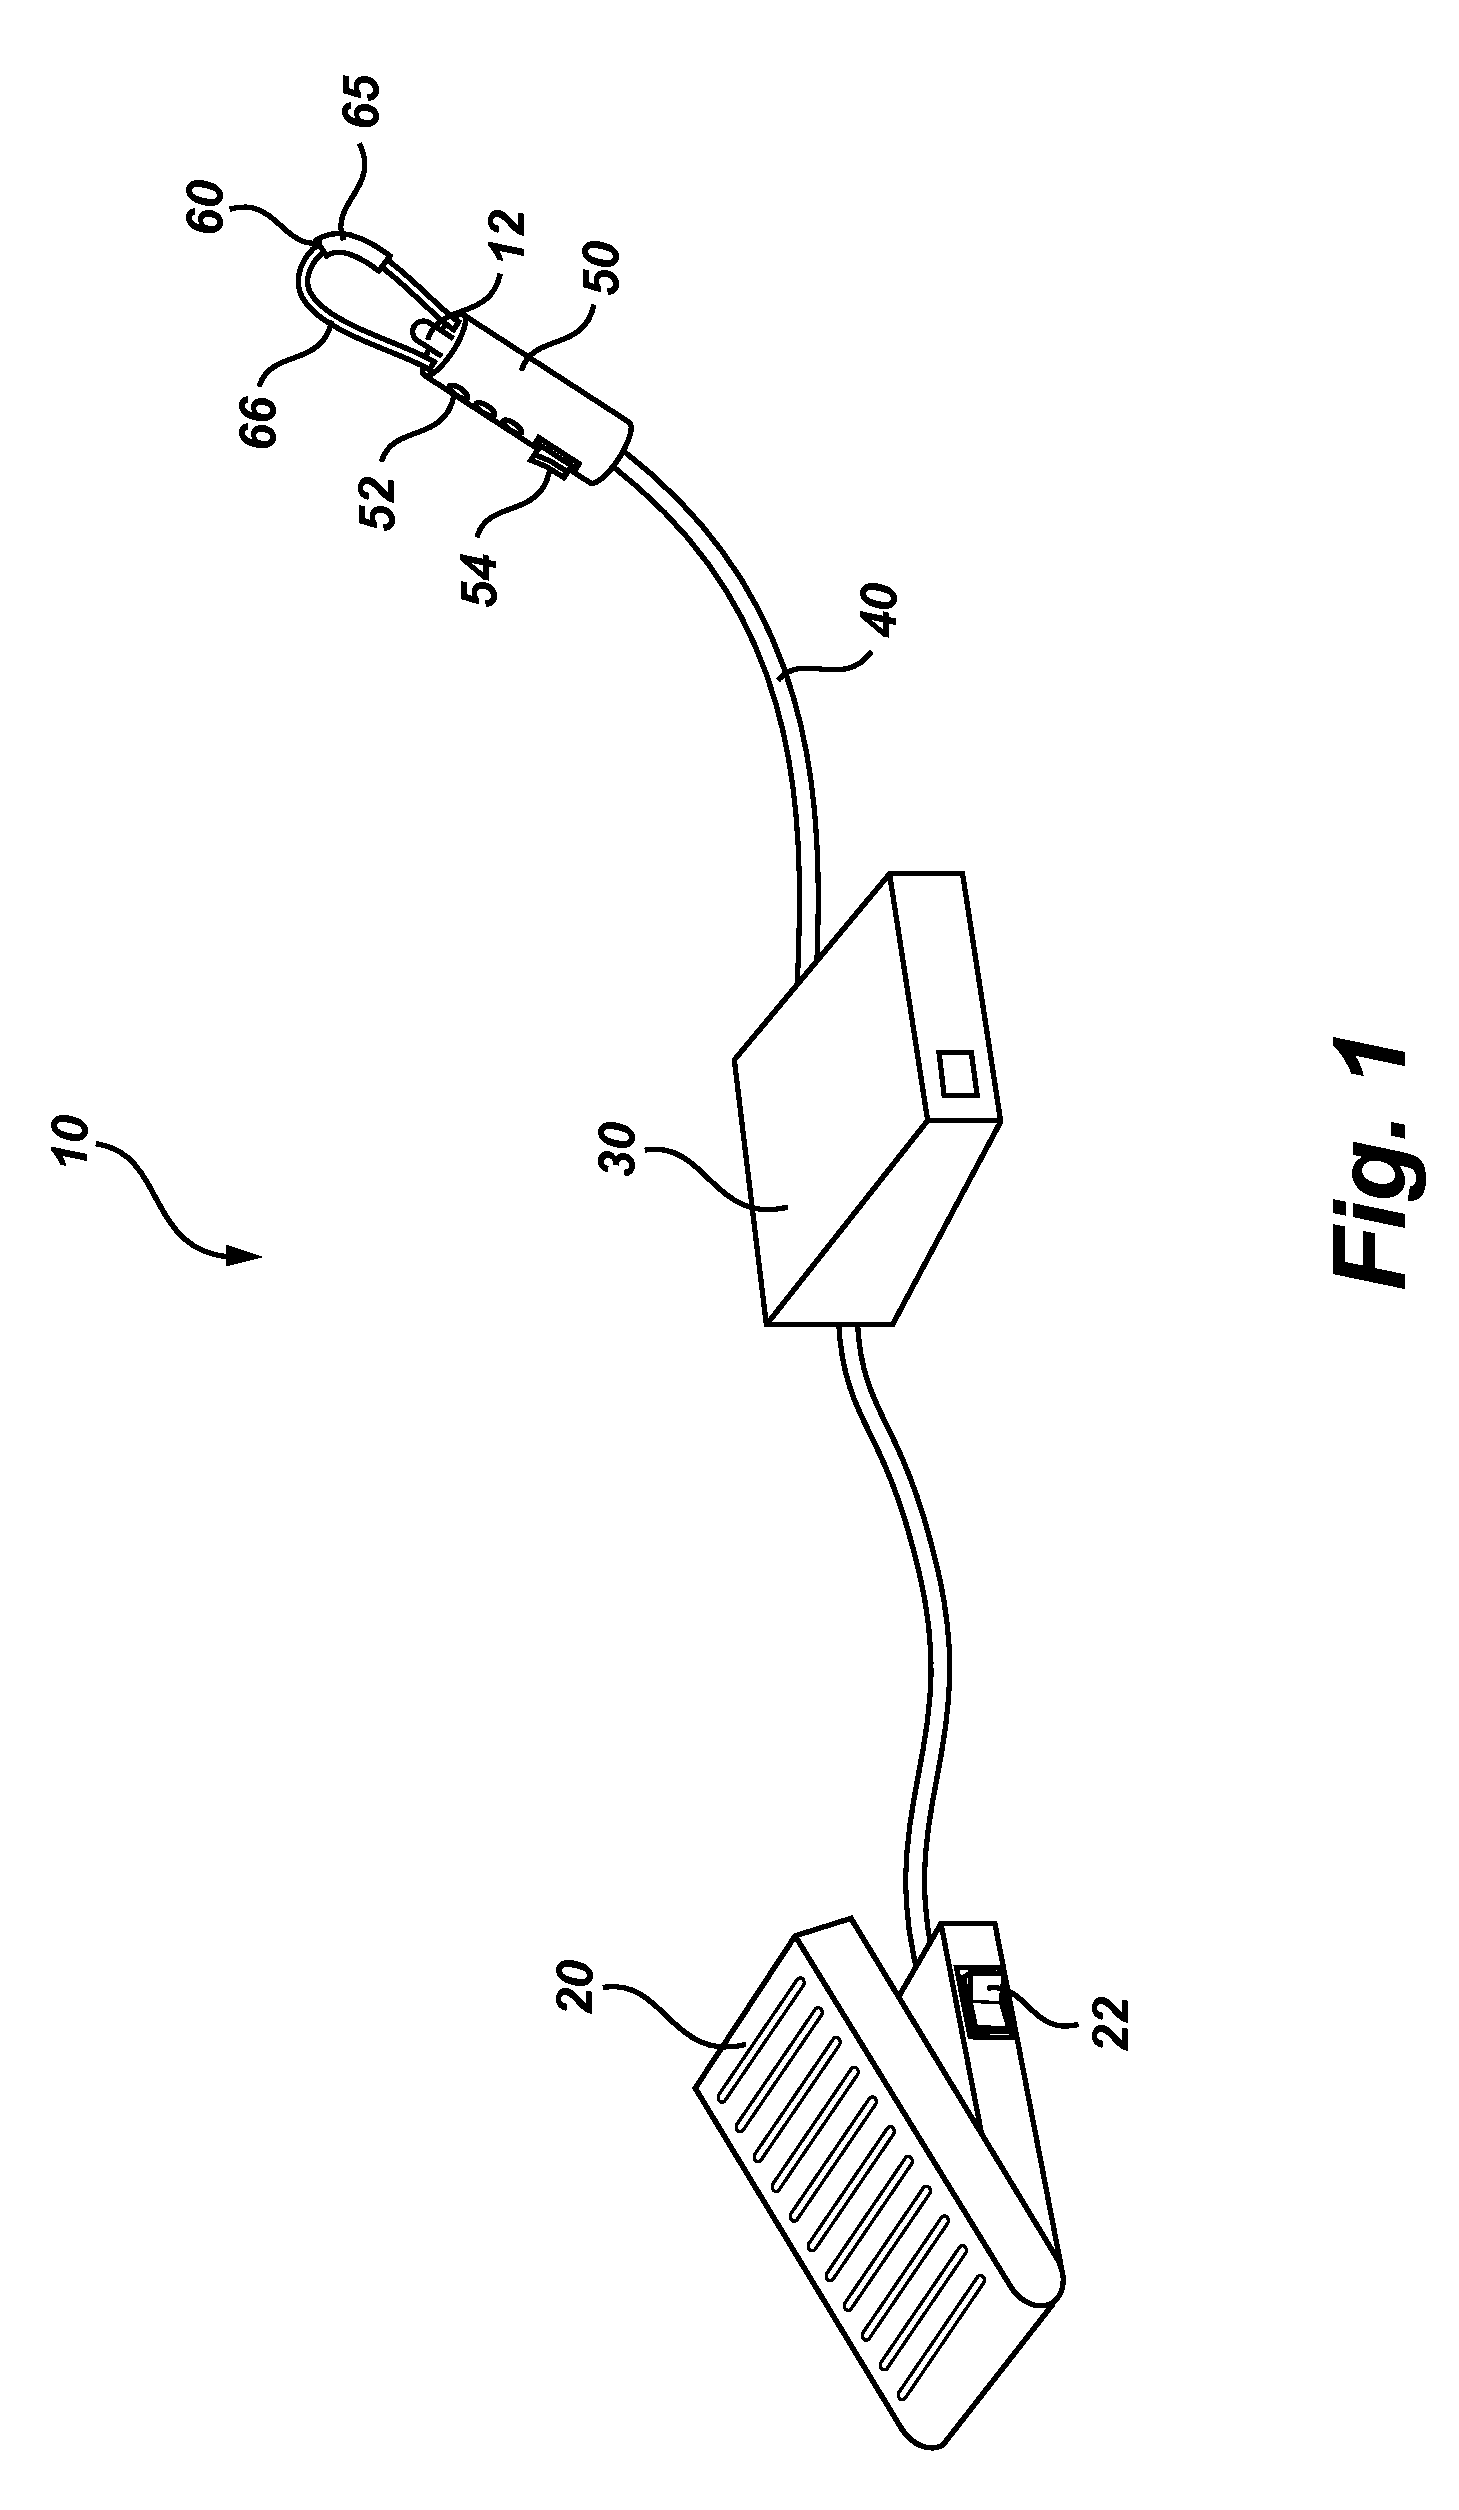 Catheter with inductively heated regions